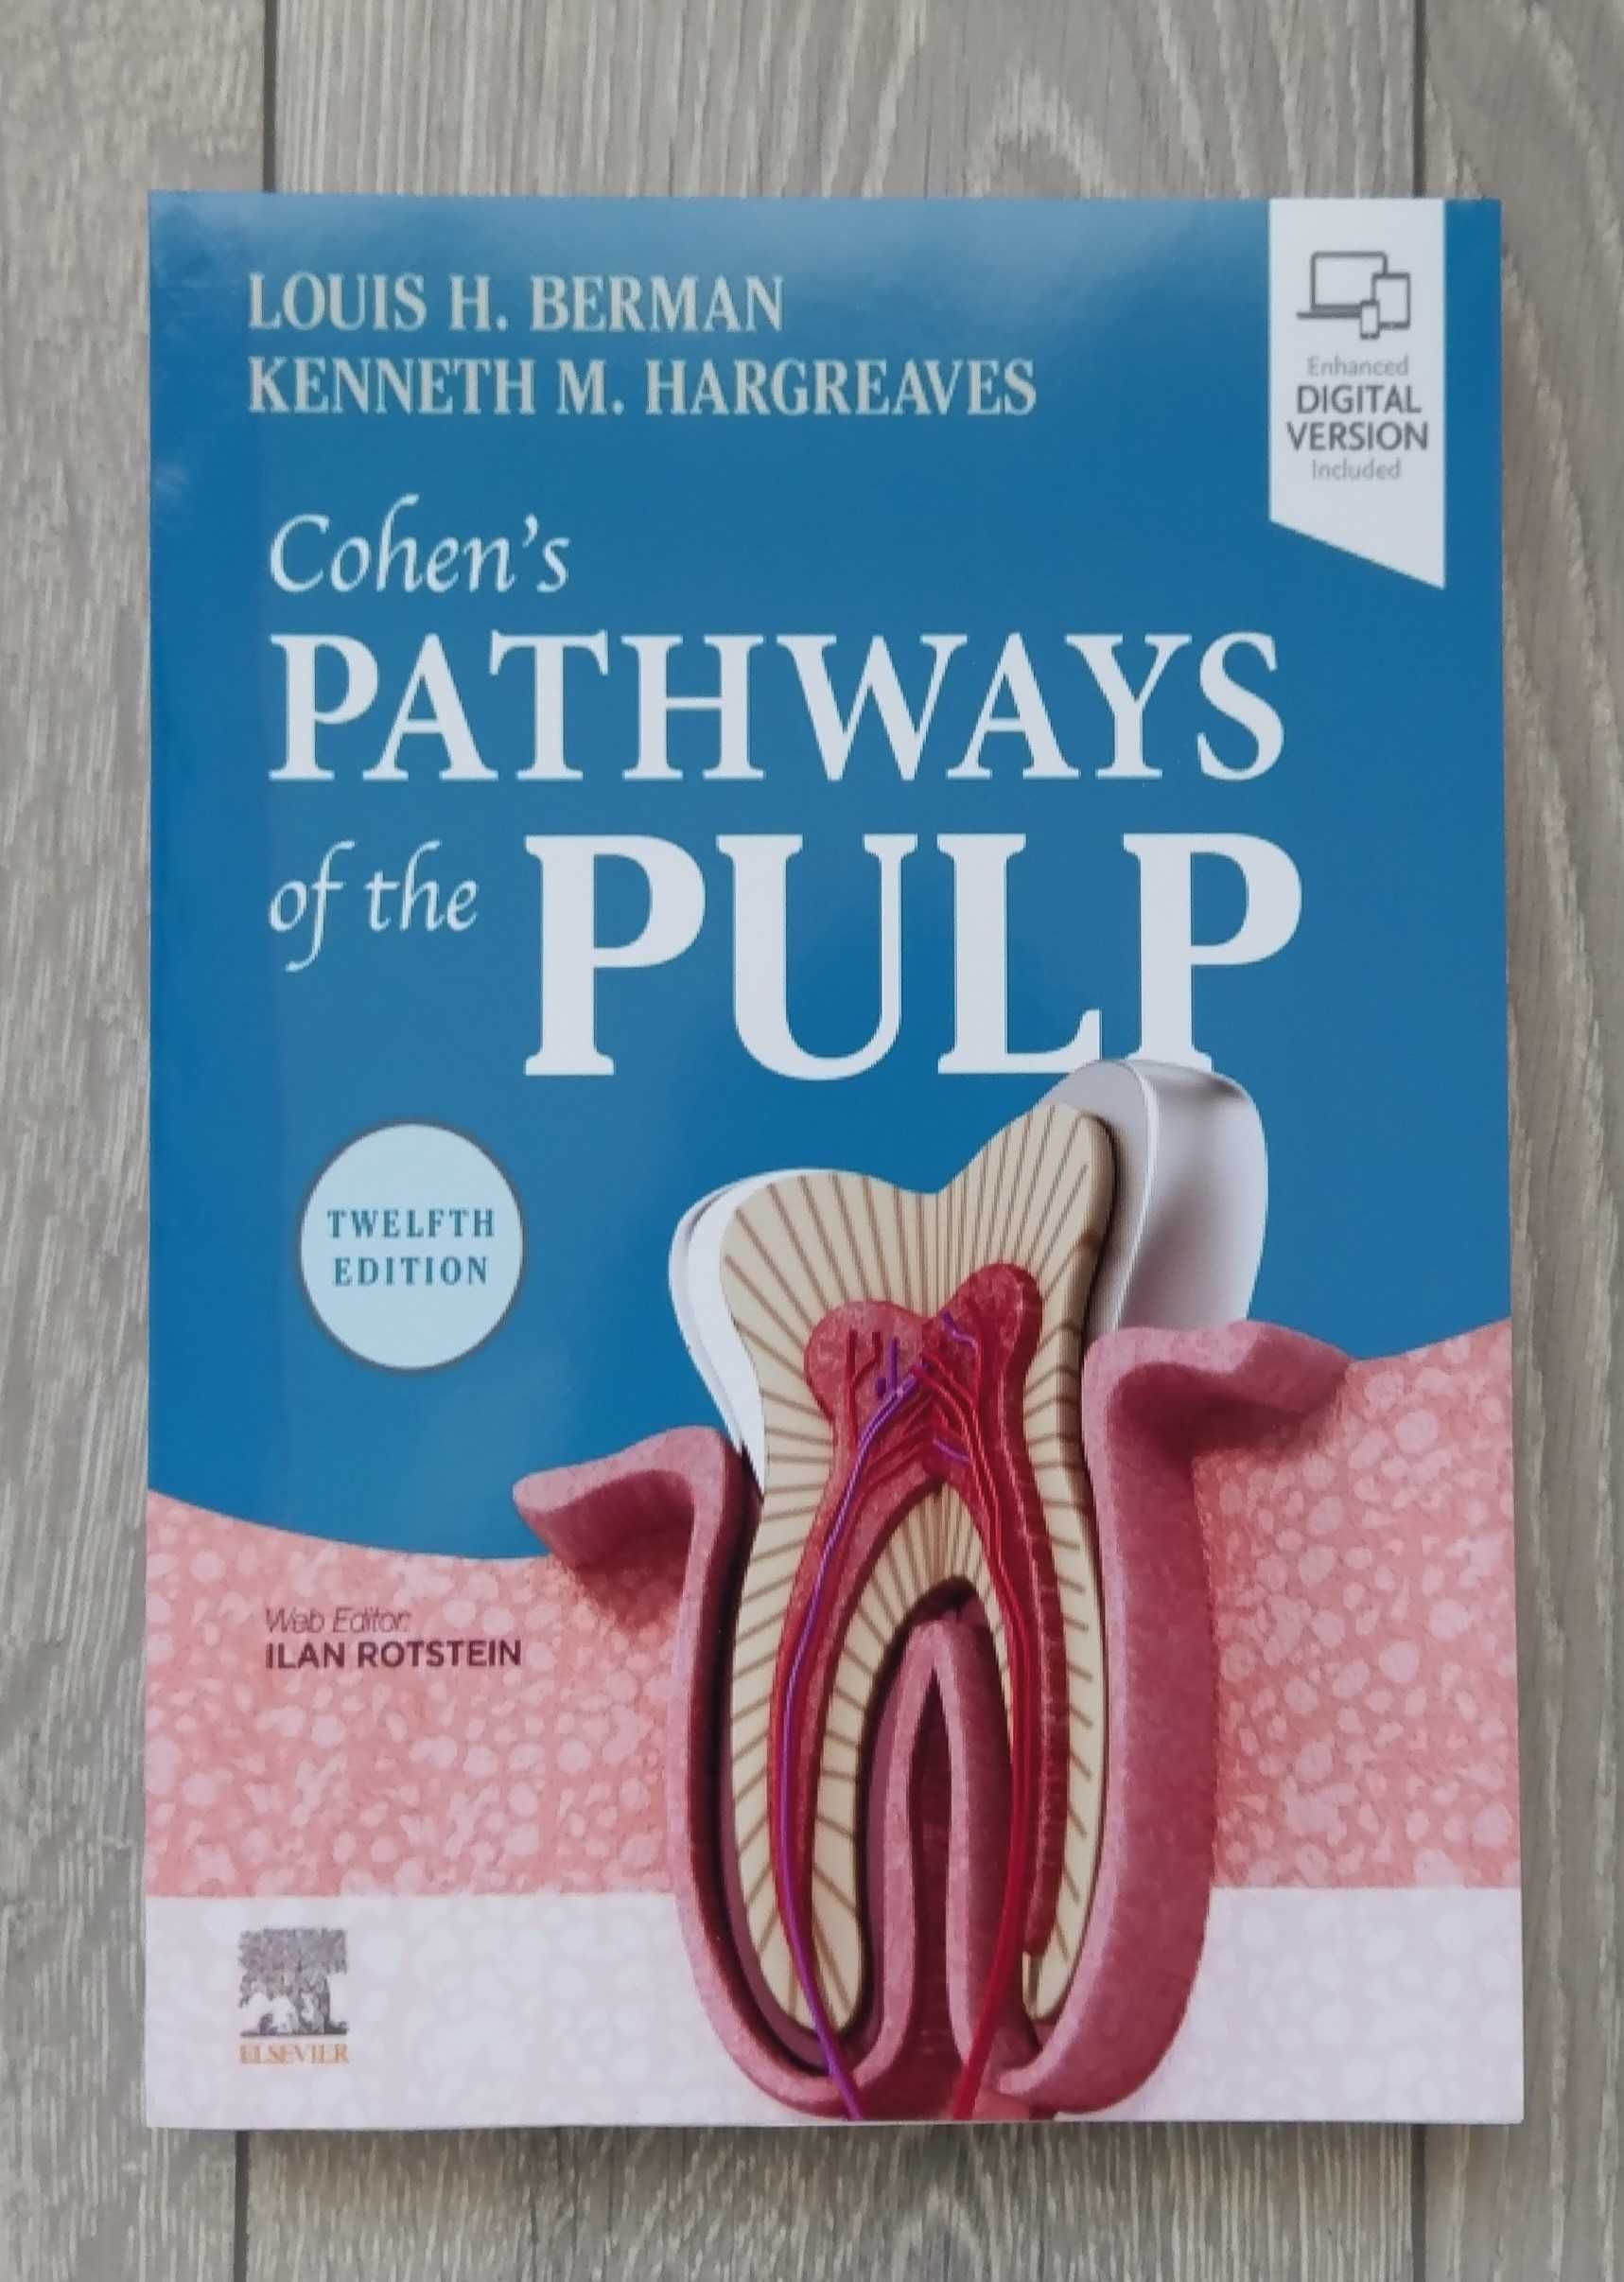 Cohen's Pathways of the Pulp: 12th Edition Engleza